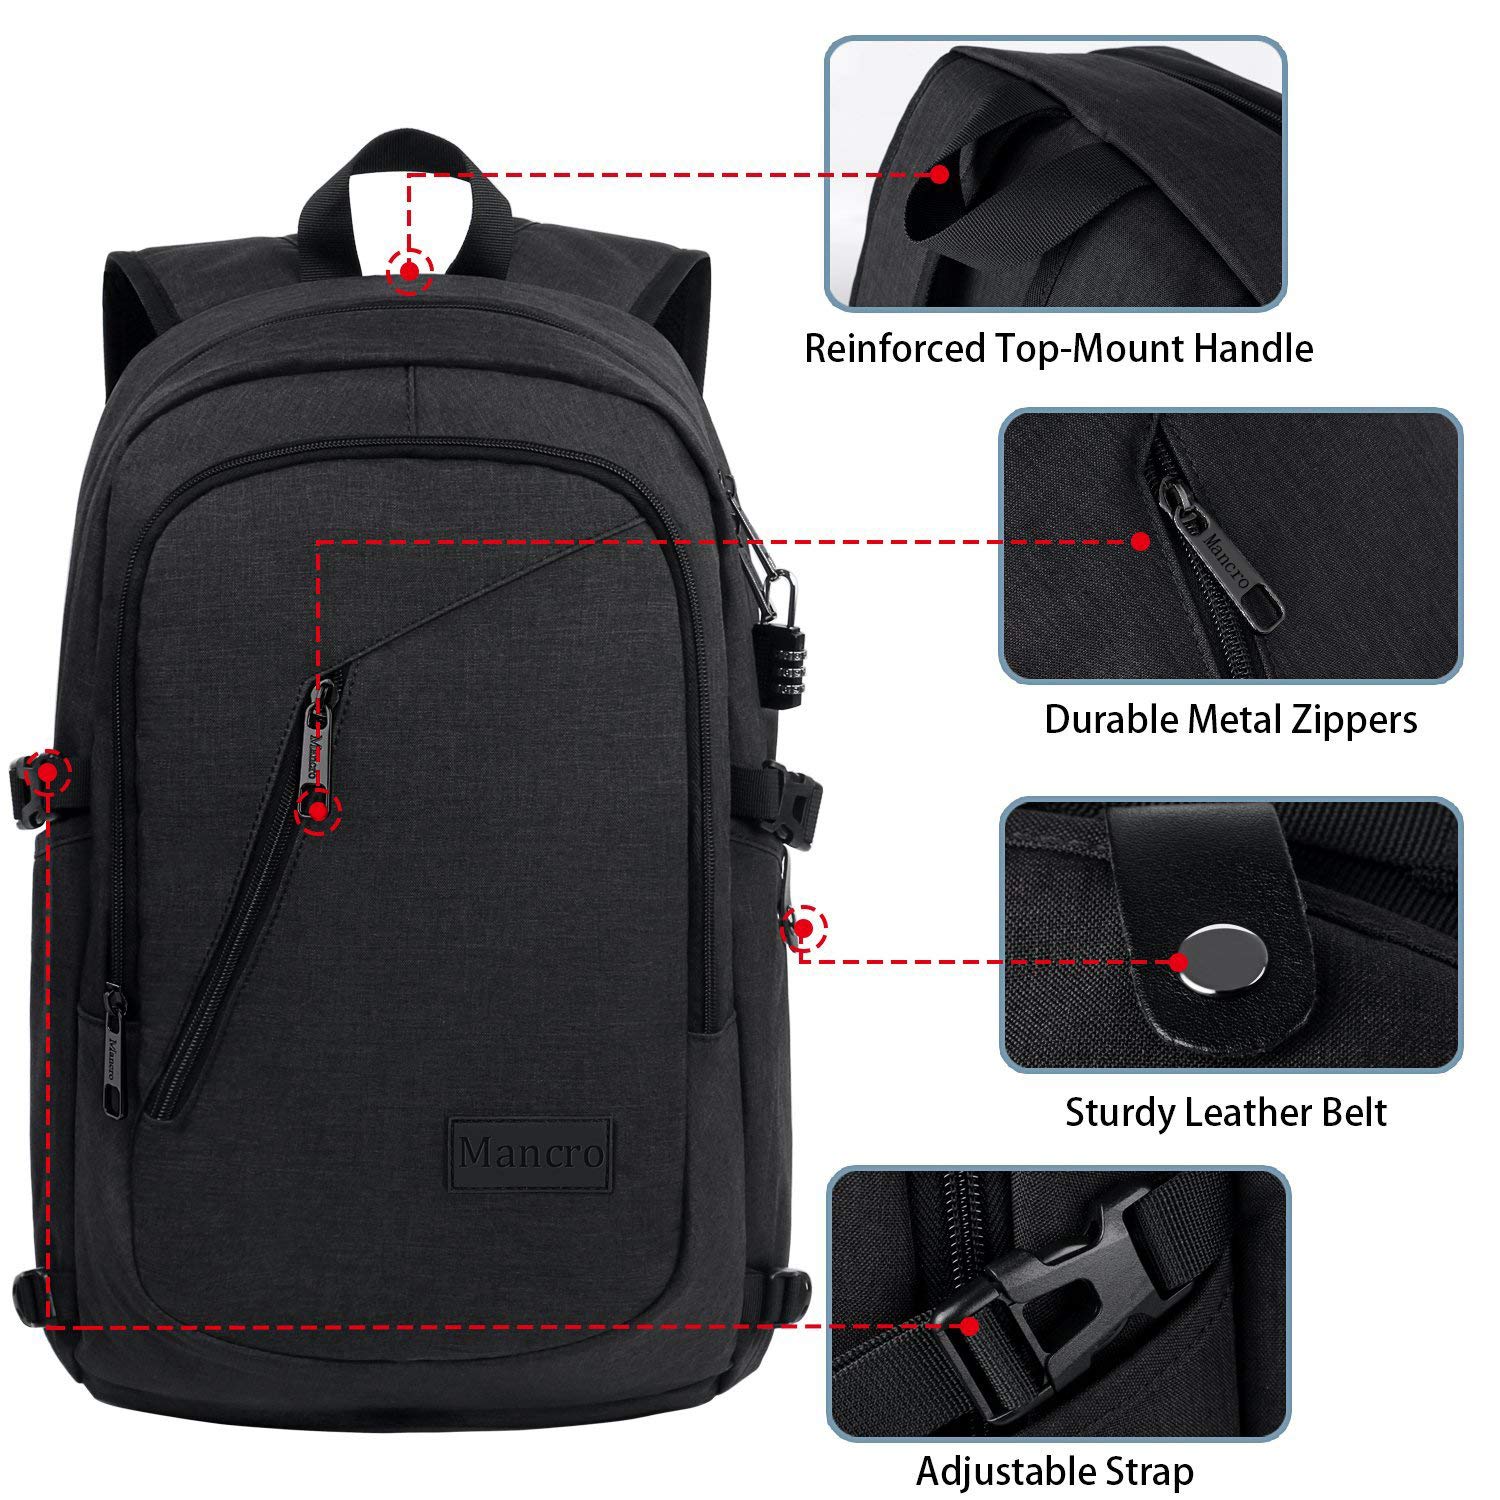 Anti Theft Business Laptop Backpack with USB Charging Port Fits 15.6 inch Laptop, Slim Travel College Bookbag for MacBook Computer, School Computer Bag for Women & Men by Mancro (Black) - image 5 of 7